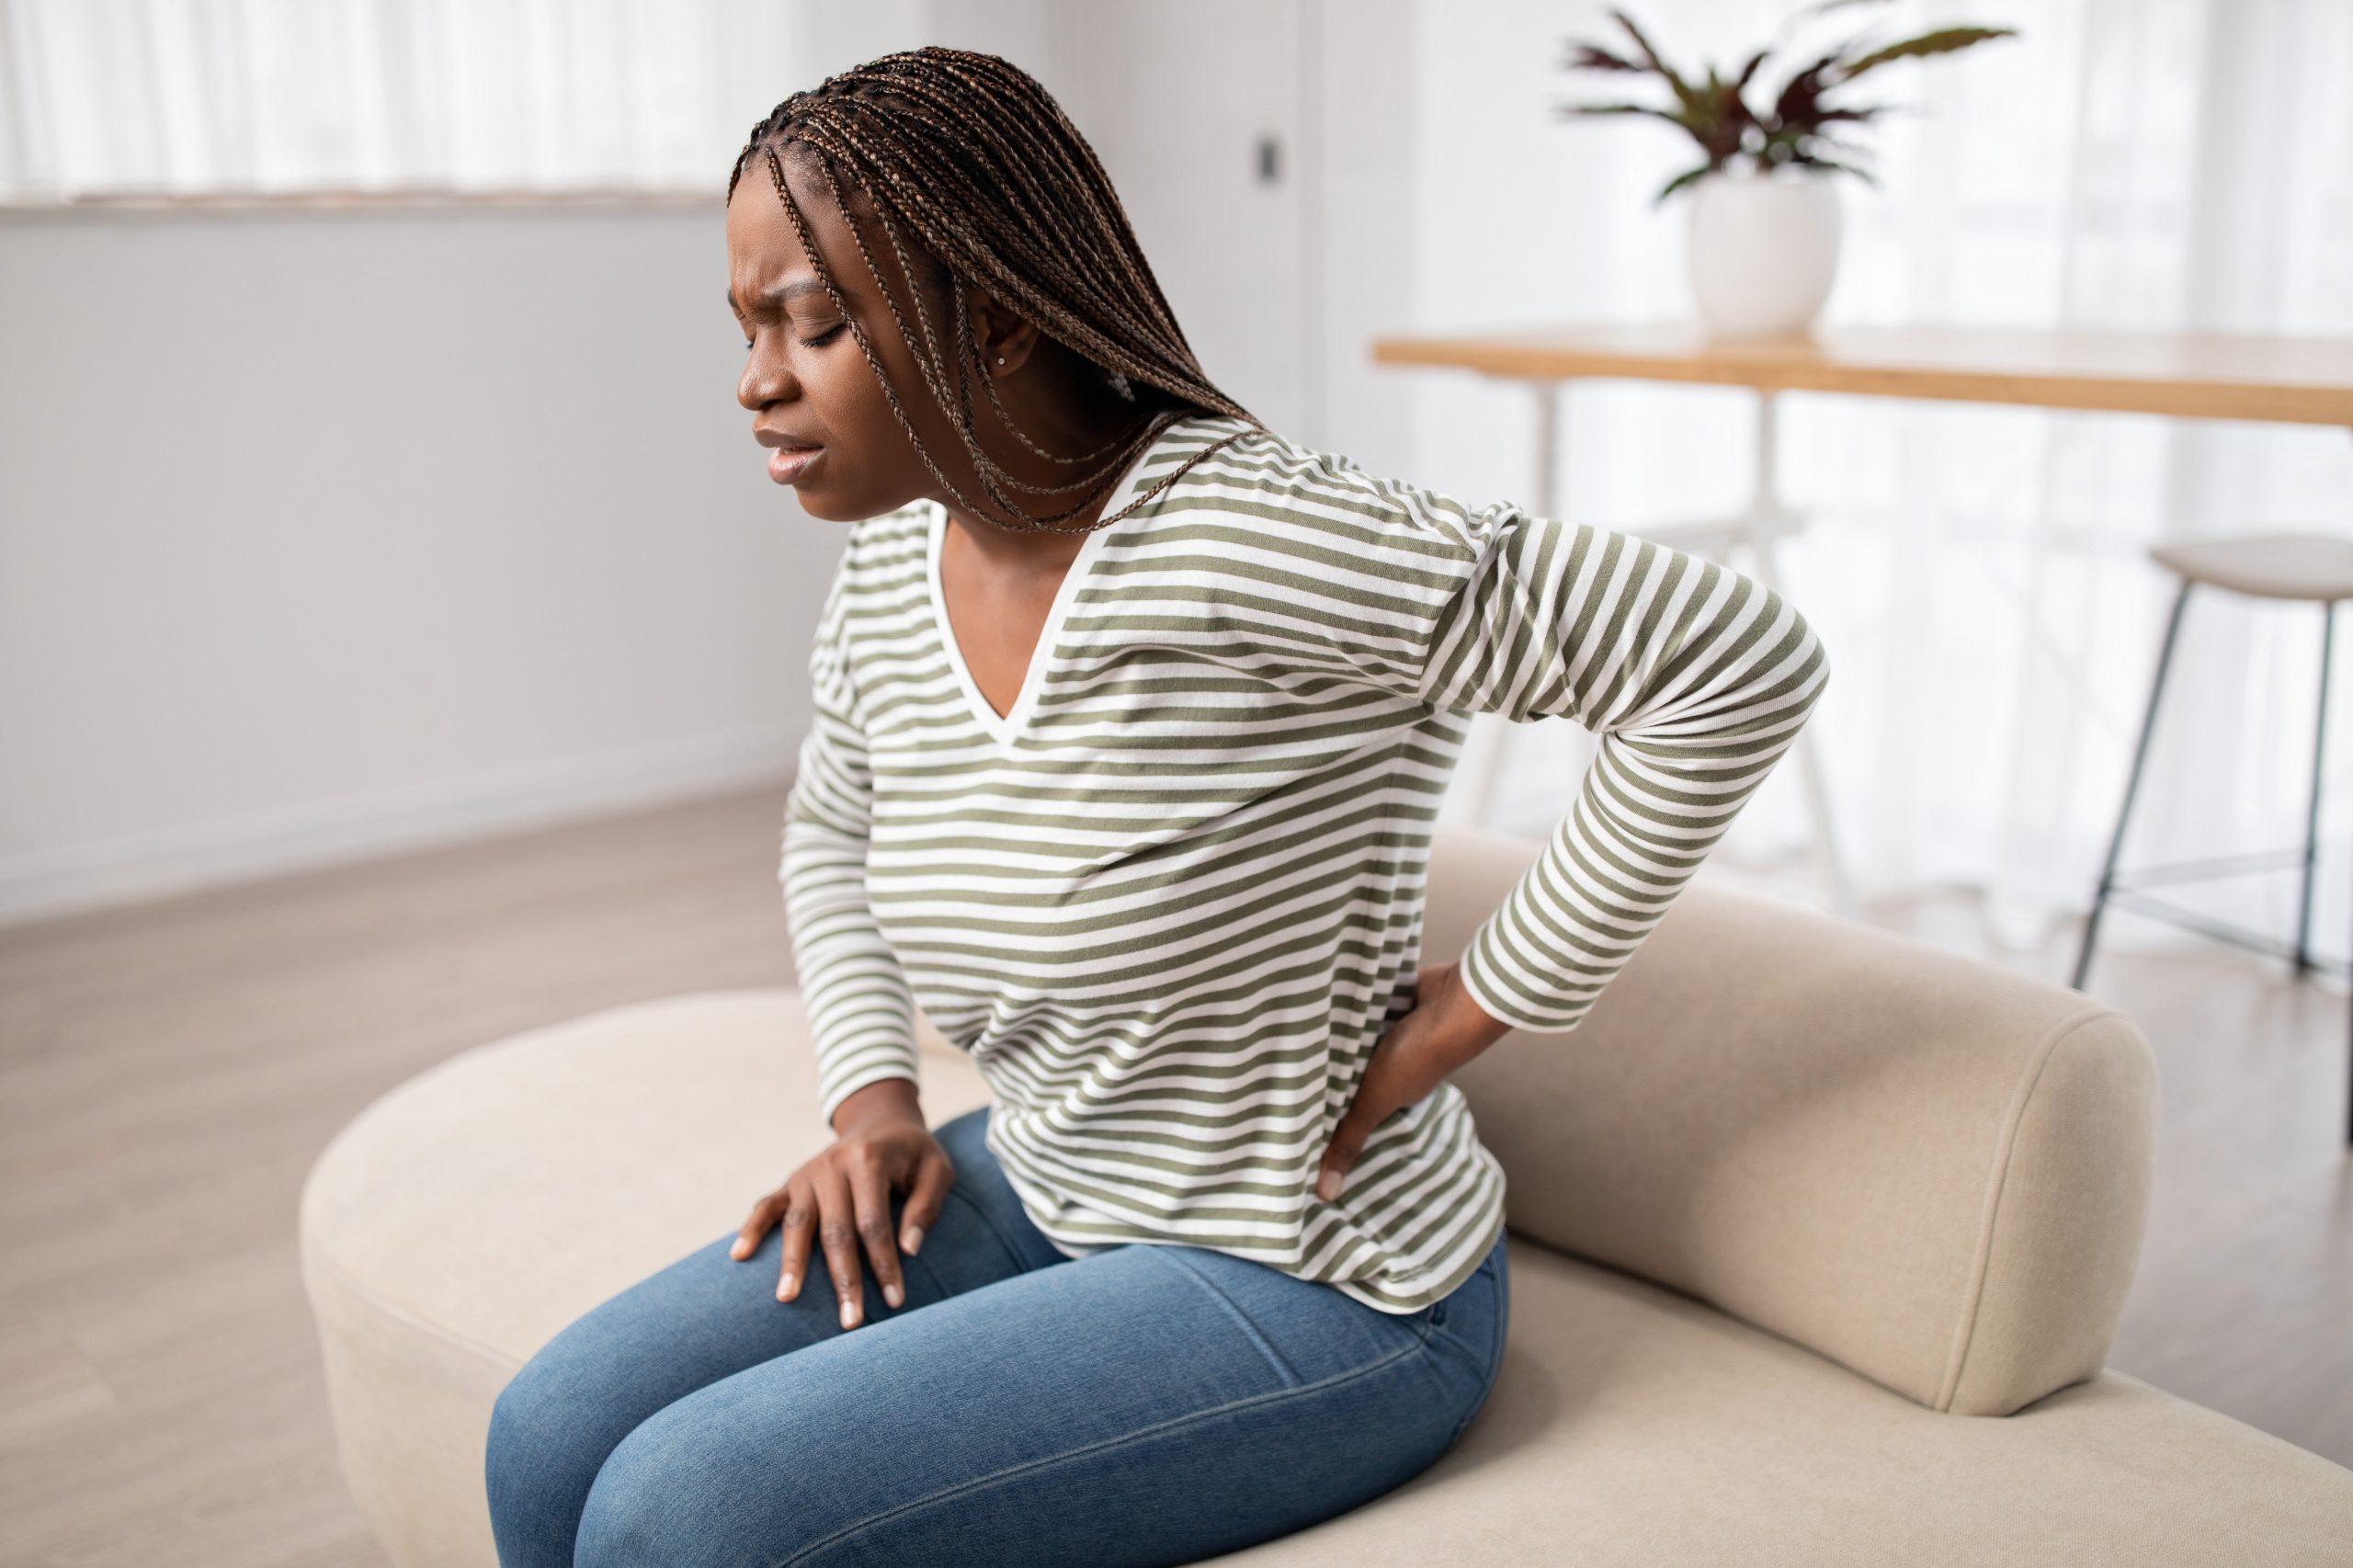 Upset young African-American long-haired woman in pain sitting on couch, touching her lower back, african american lady suffering from backache, muscle strain, period cramps.